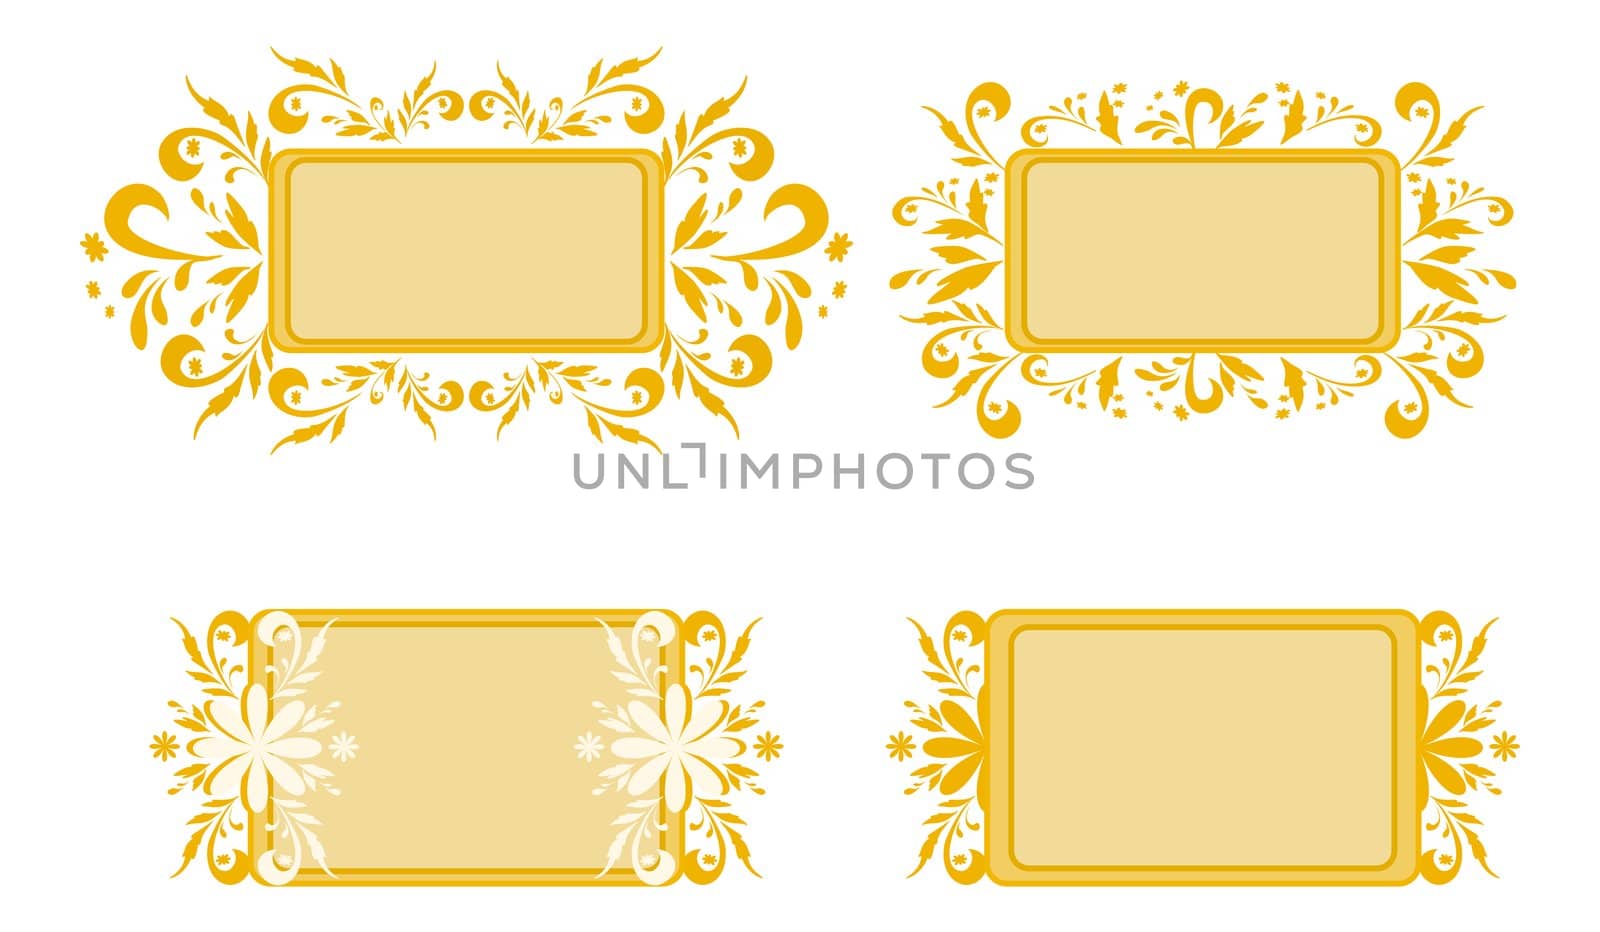 Abstract backgrounds, banners, plates with floral pattern